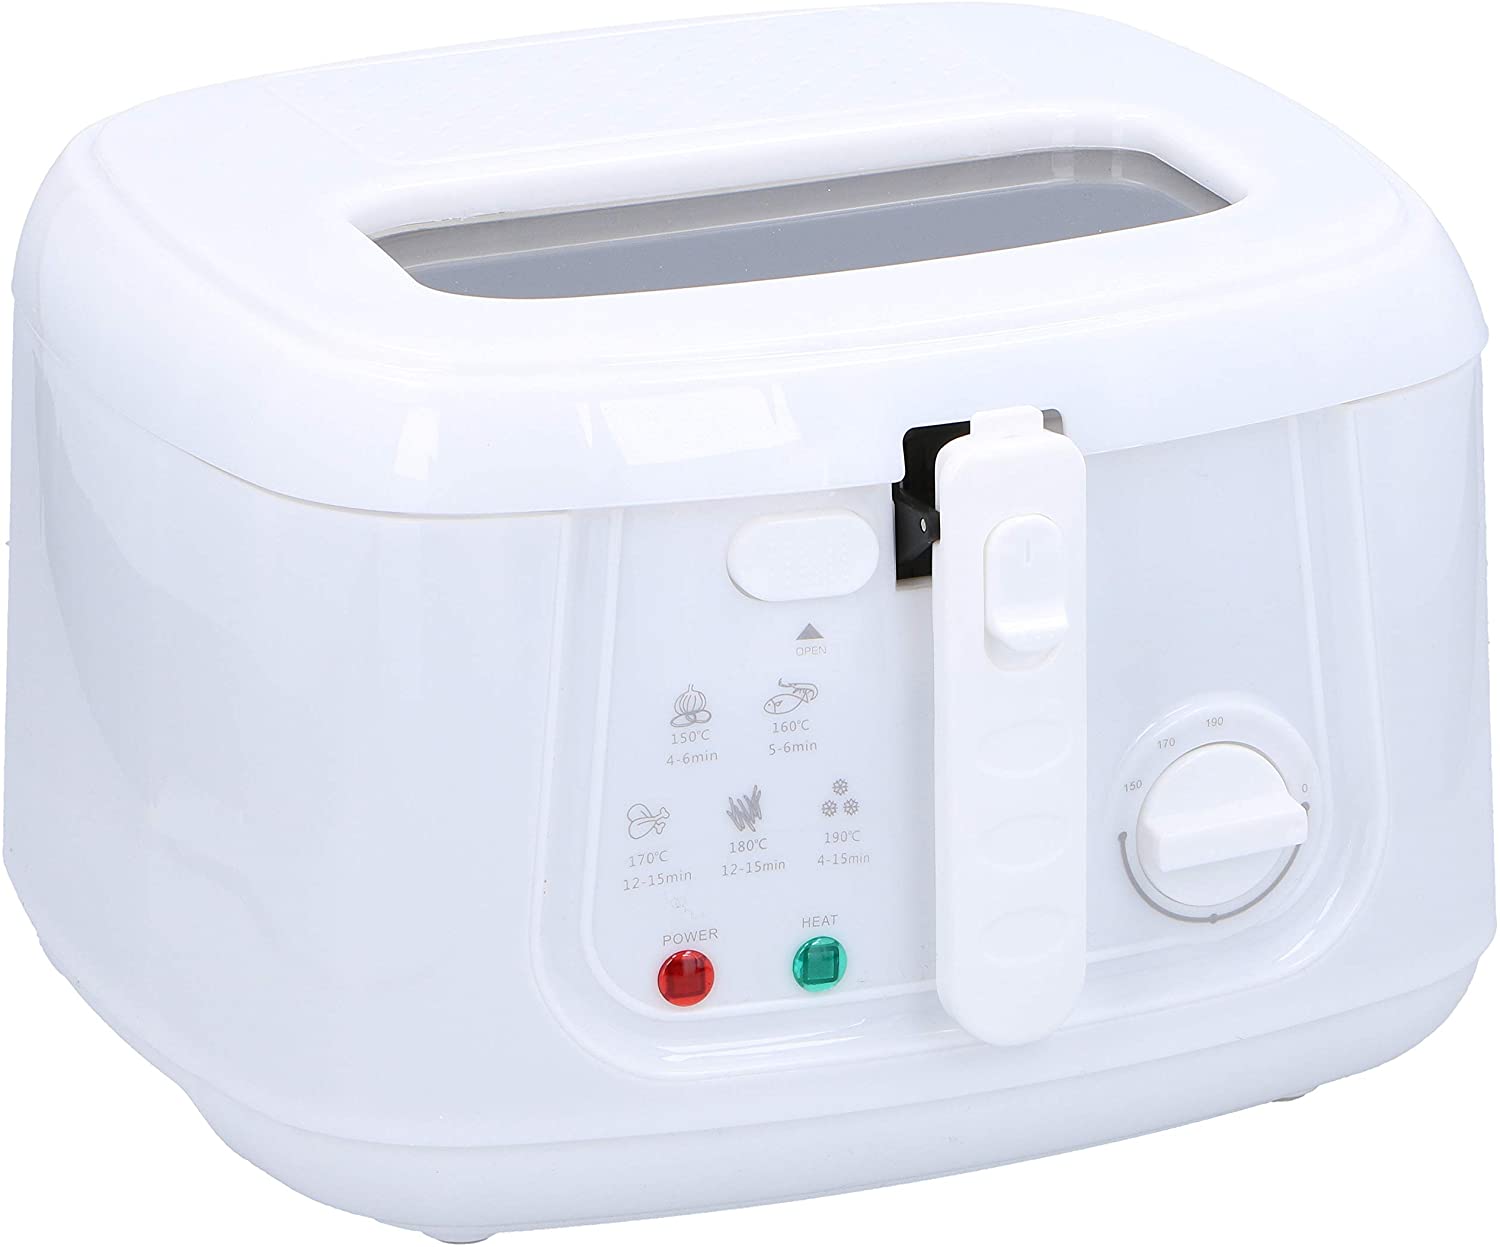 Dunlop 3 litre fryer with 1800 watts power and BPA free. White with large transparent window, temperature control and indicator light